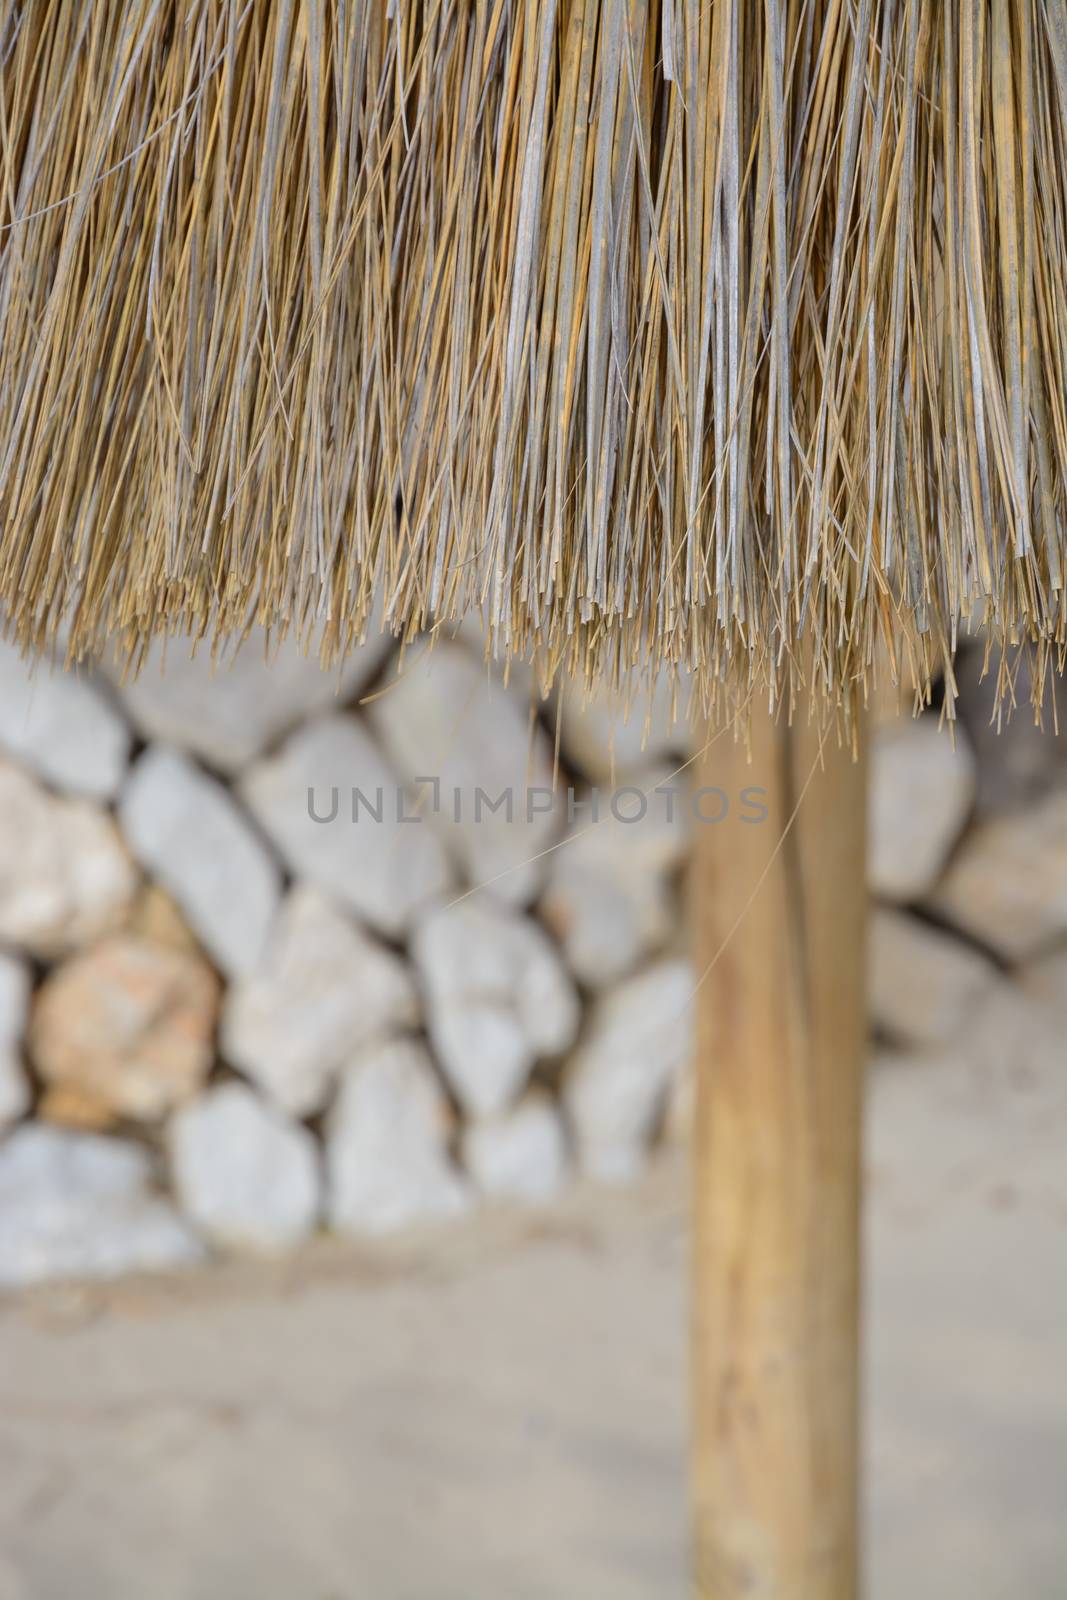 Straw parasol detail on sandy beach with dry wall in the background.